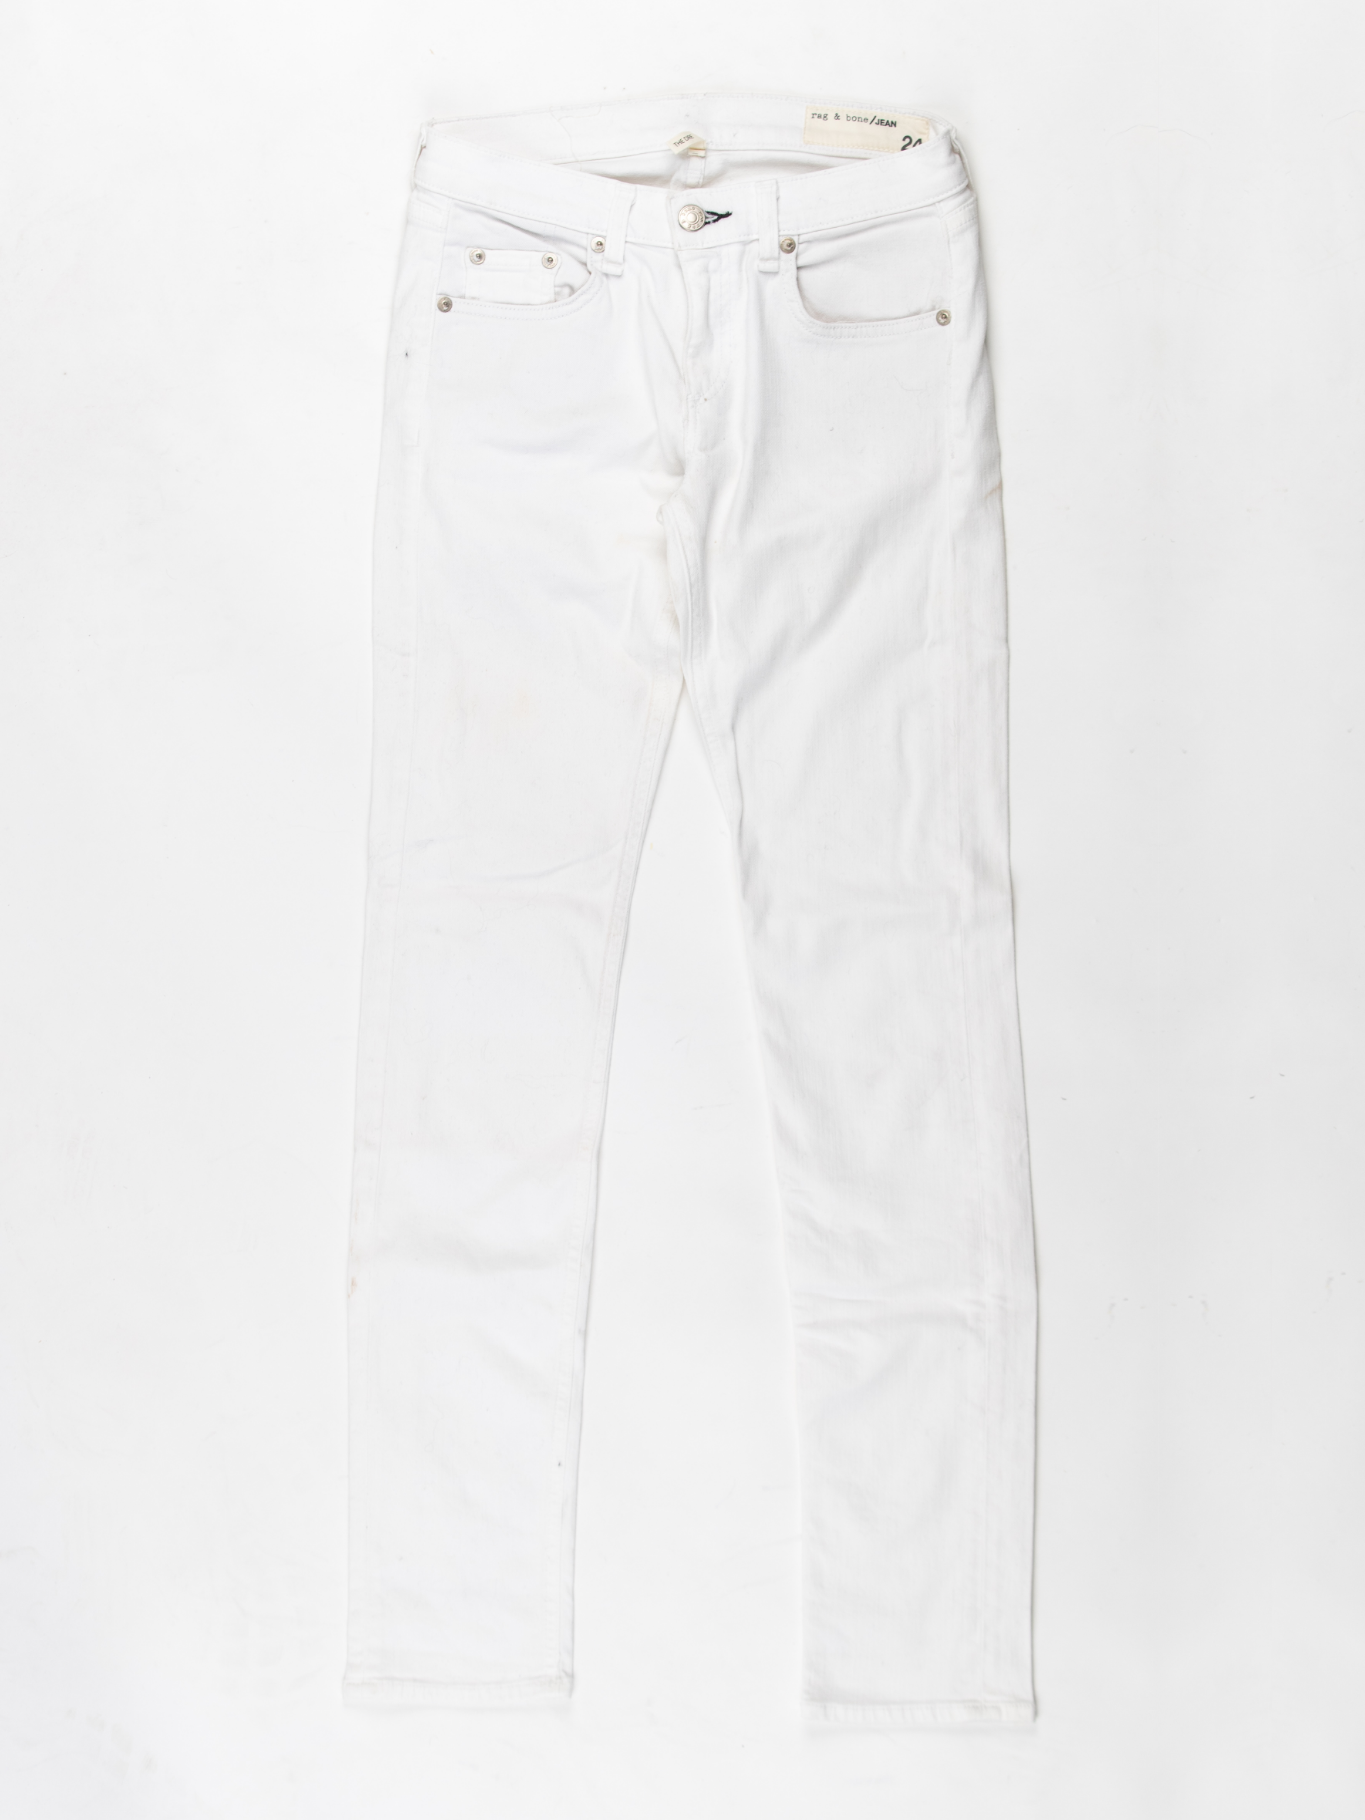 'The Dre' White jeans